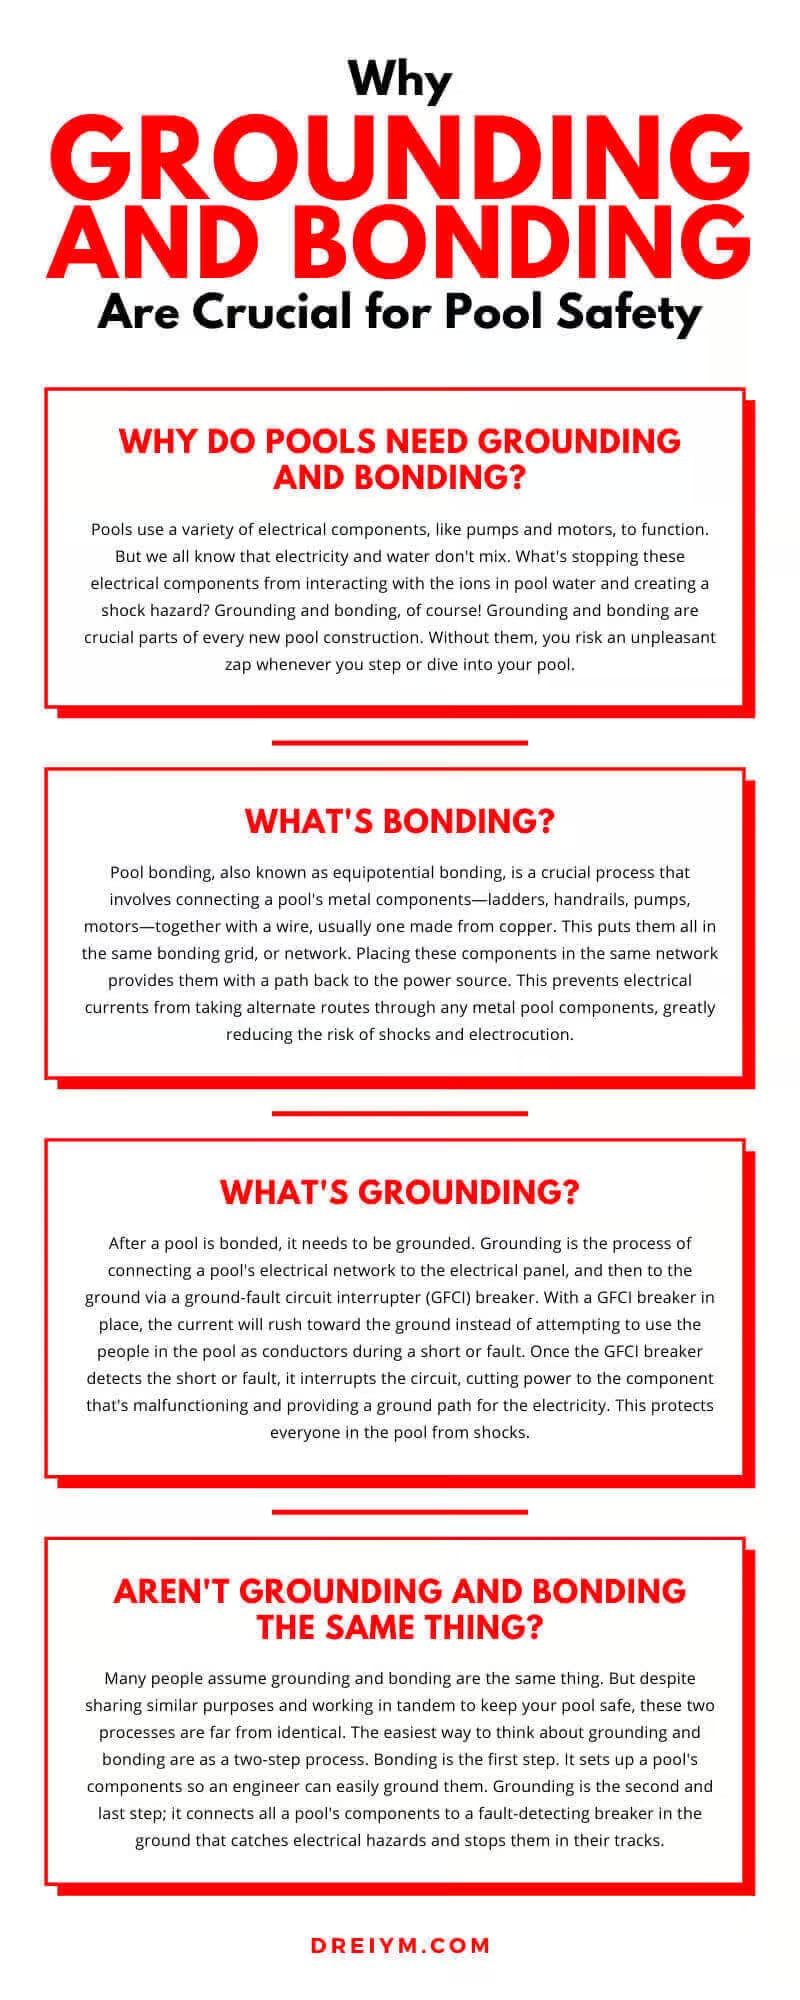 Why Grounding and Bonding Are Crucial for Pool Safety